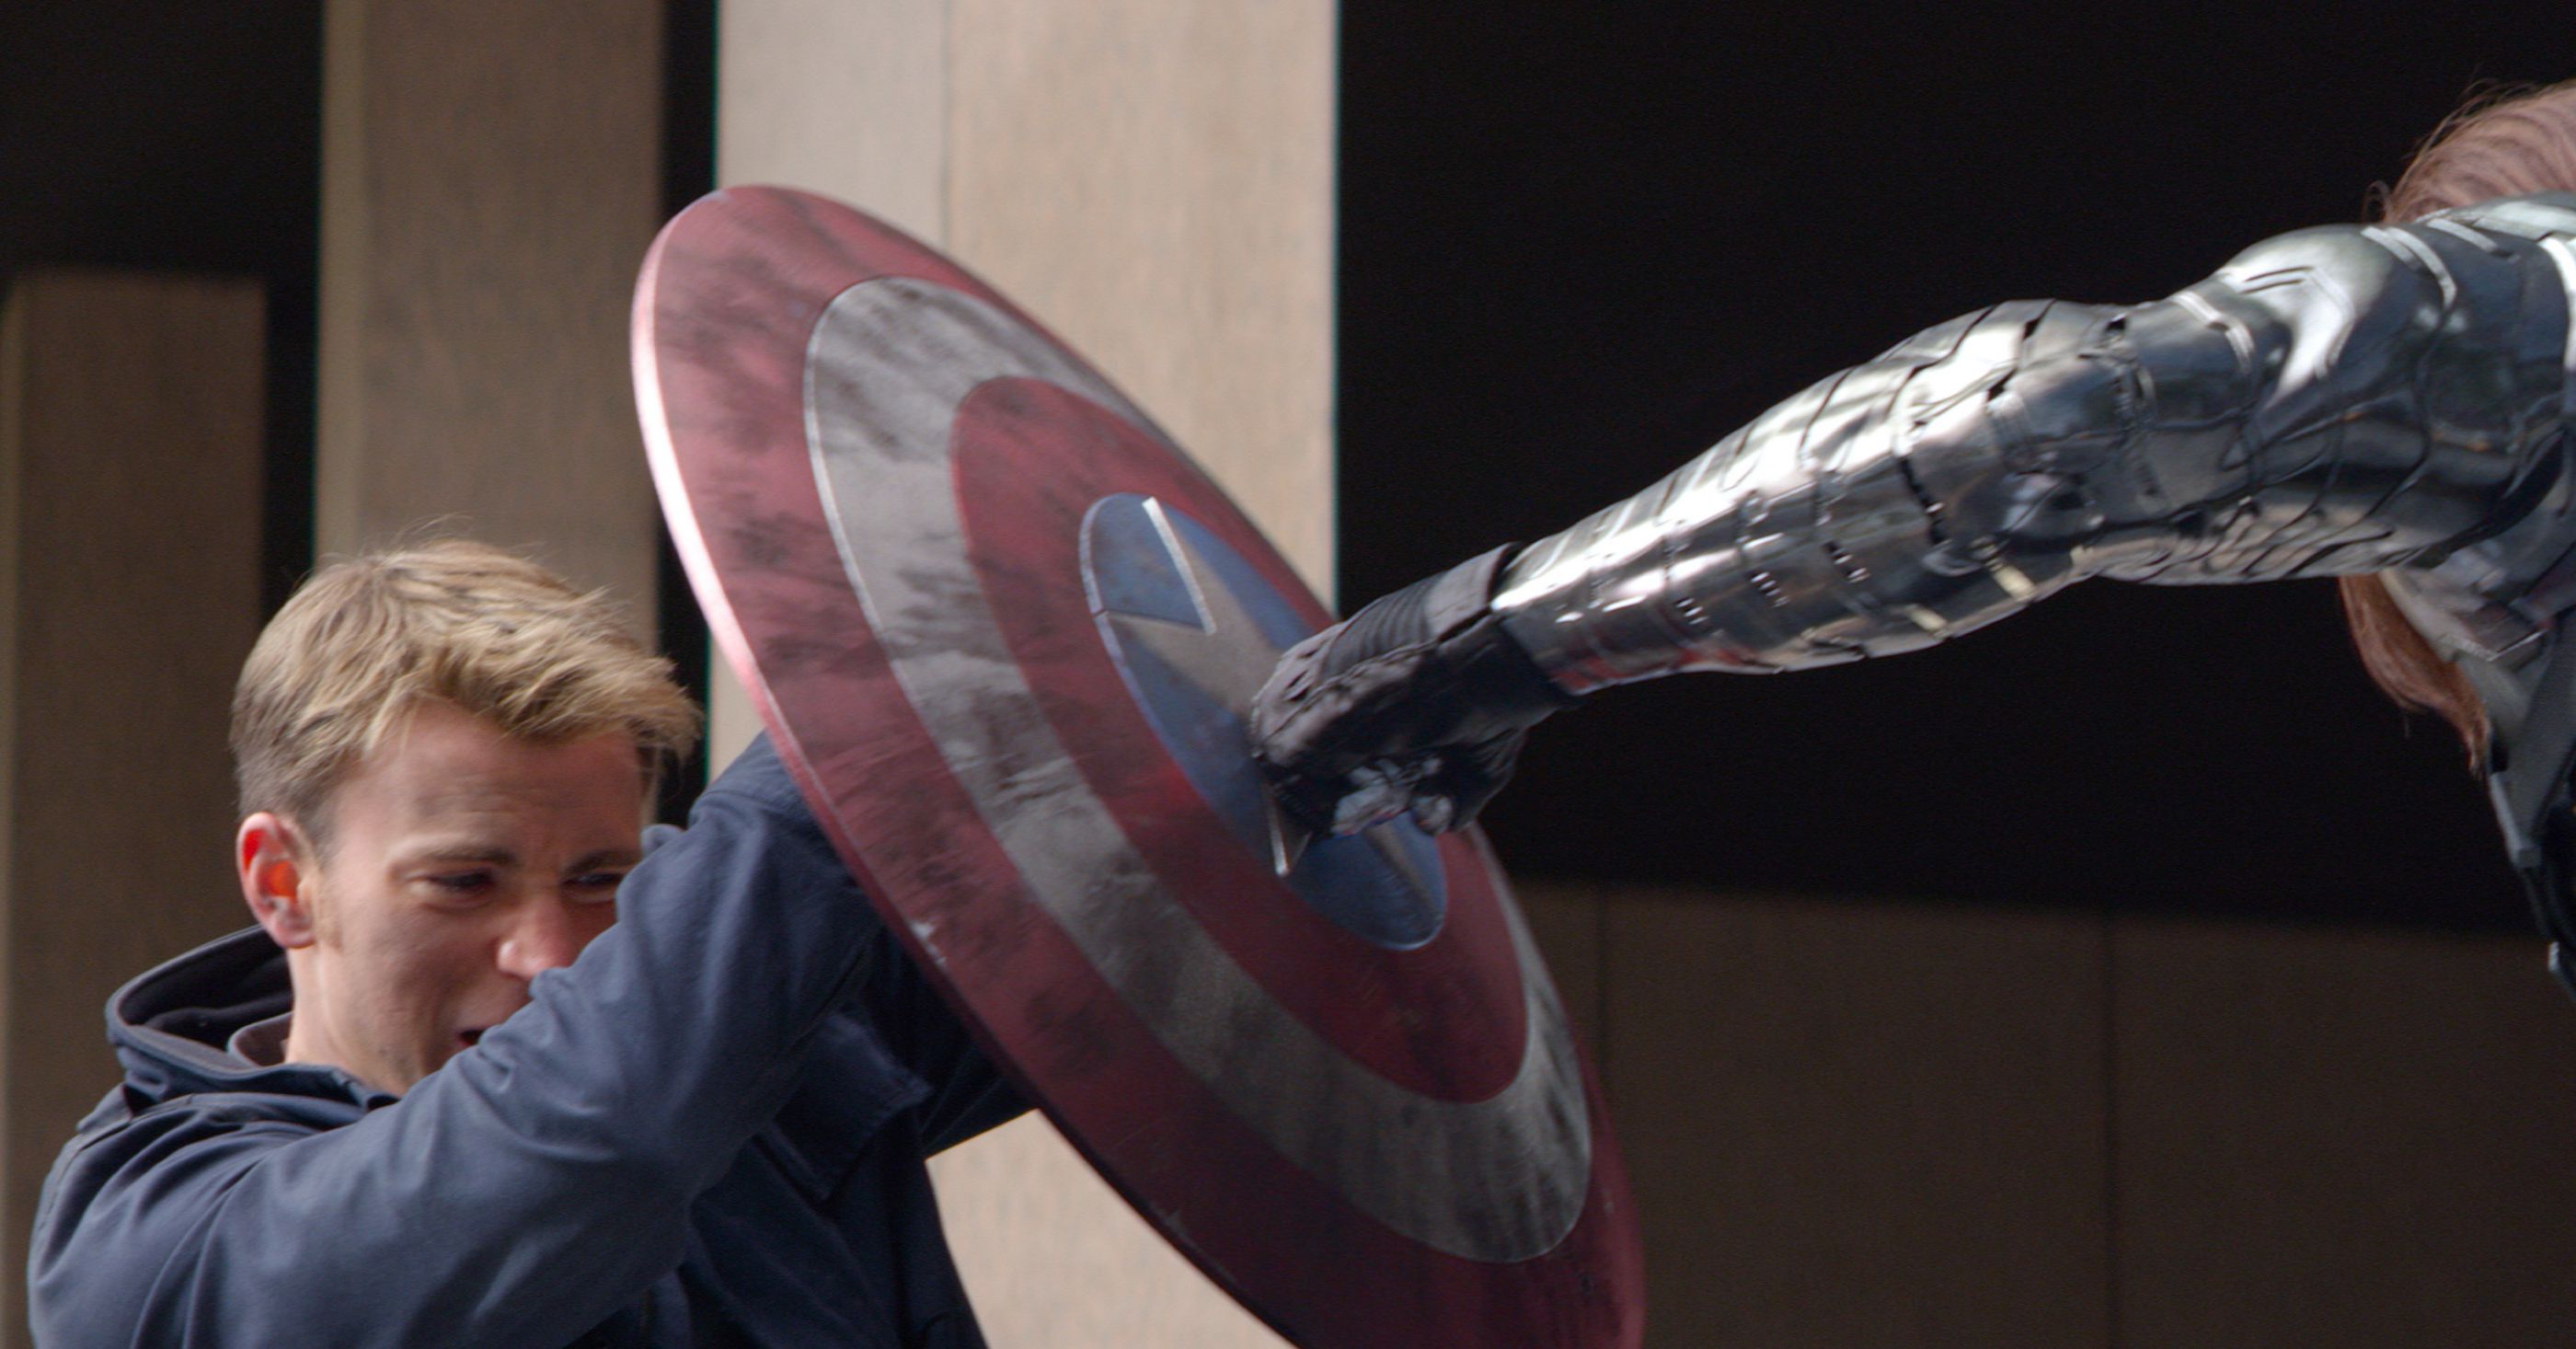 Captain America protected by shield